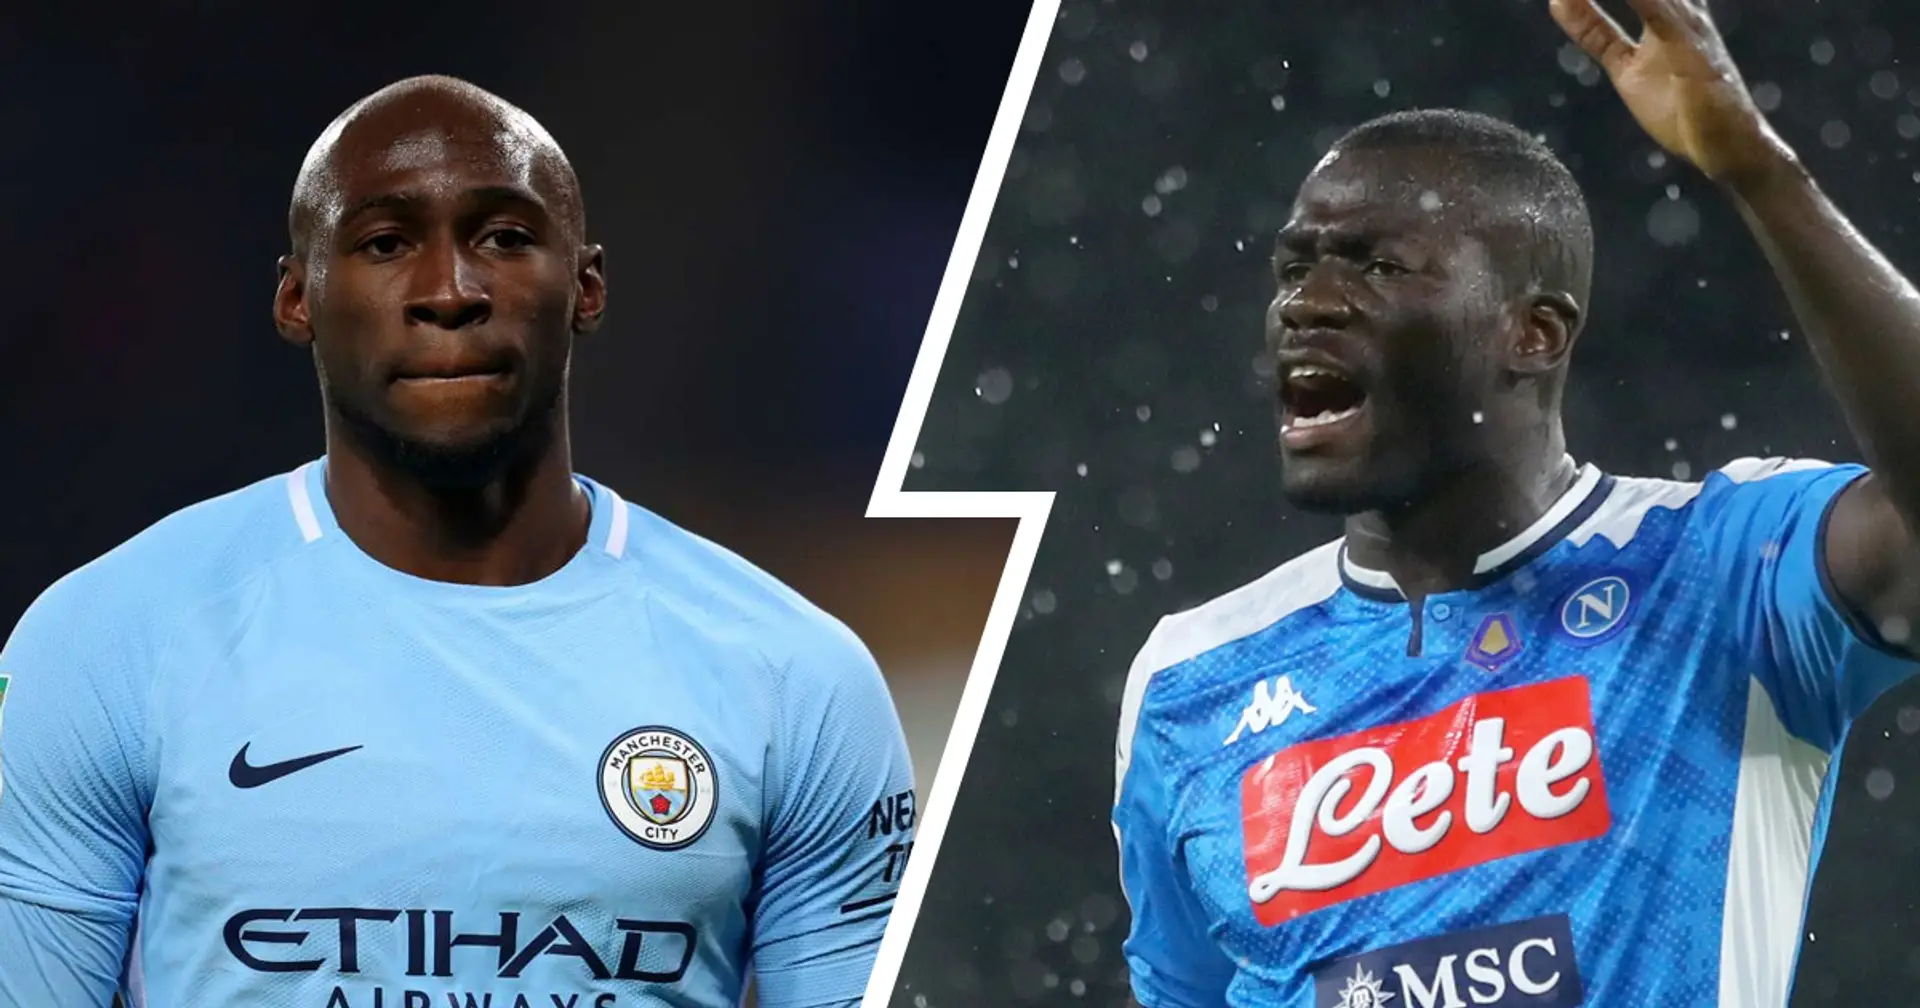 'I see similarities to Mangala': Micah Richards rips into Koulibaly after clownish display against Barcelona